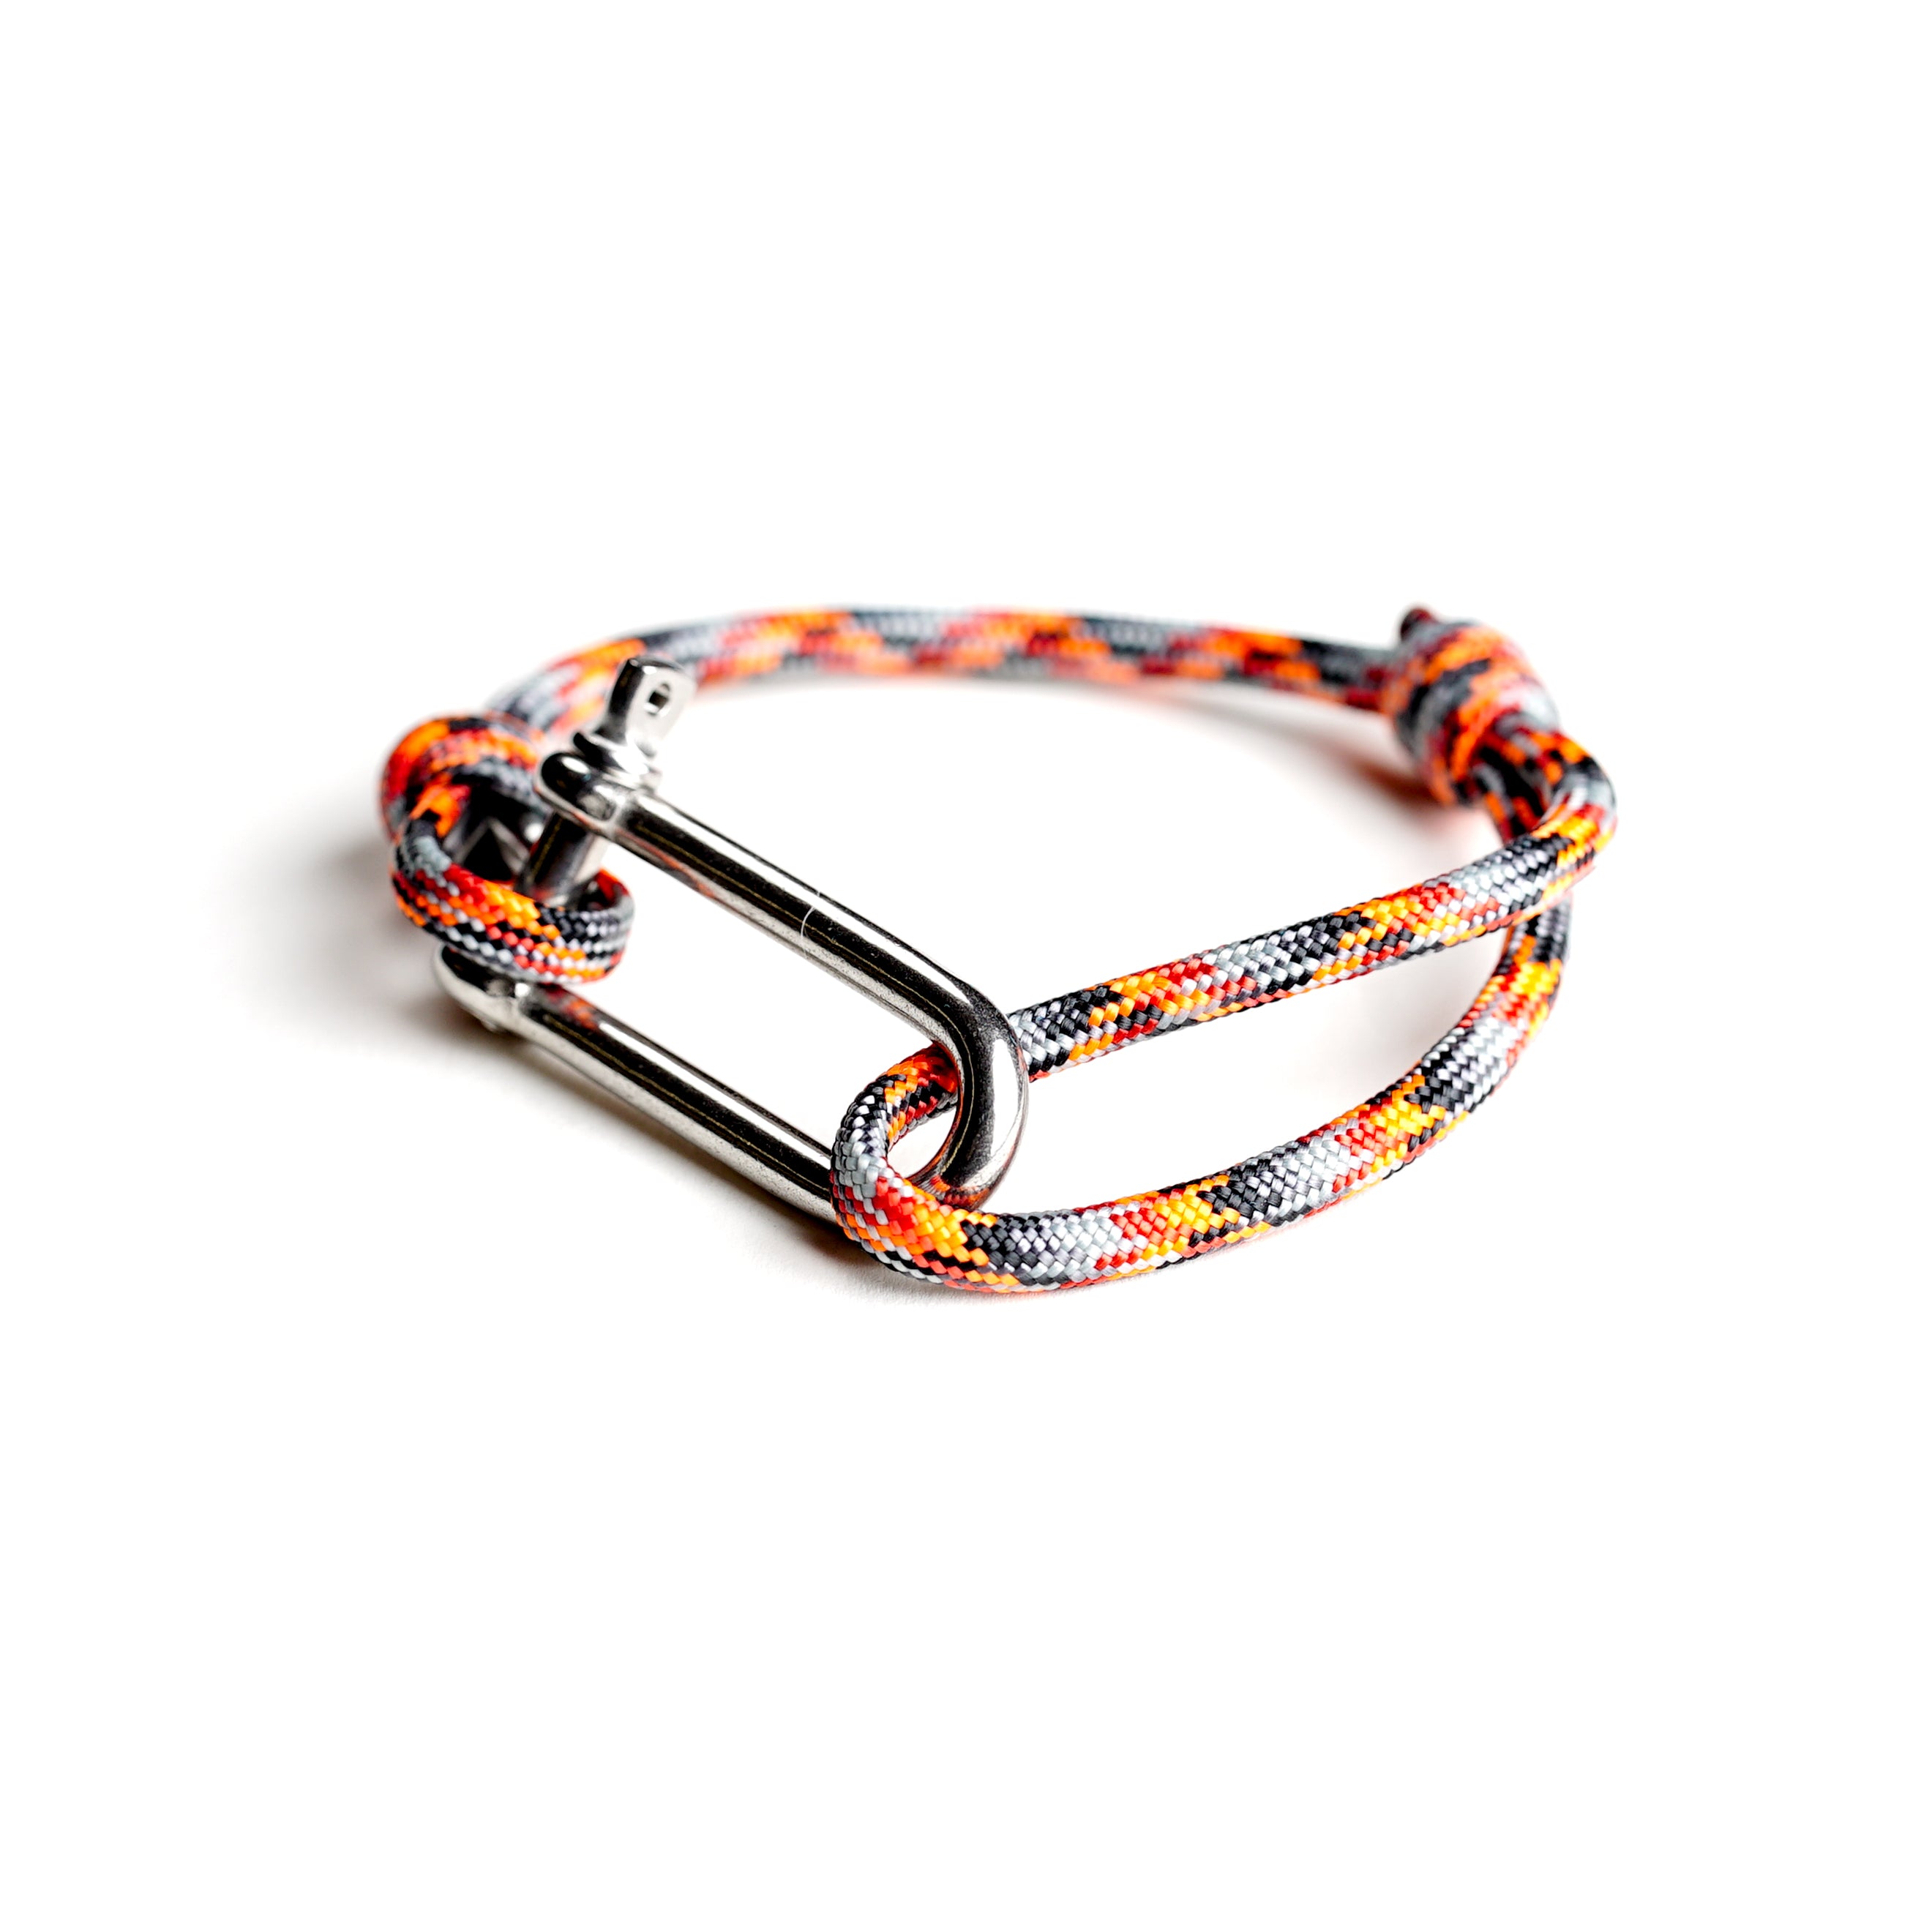 Paracord Nautical Bracelet with Stainless Steel Shackle - Orange & Grey